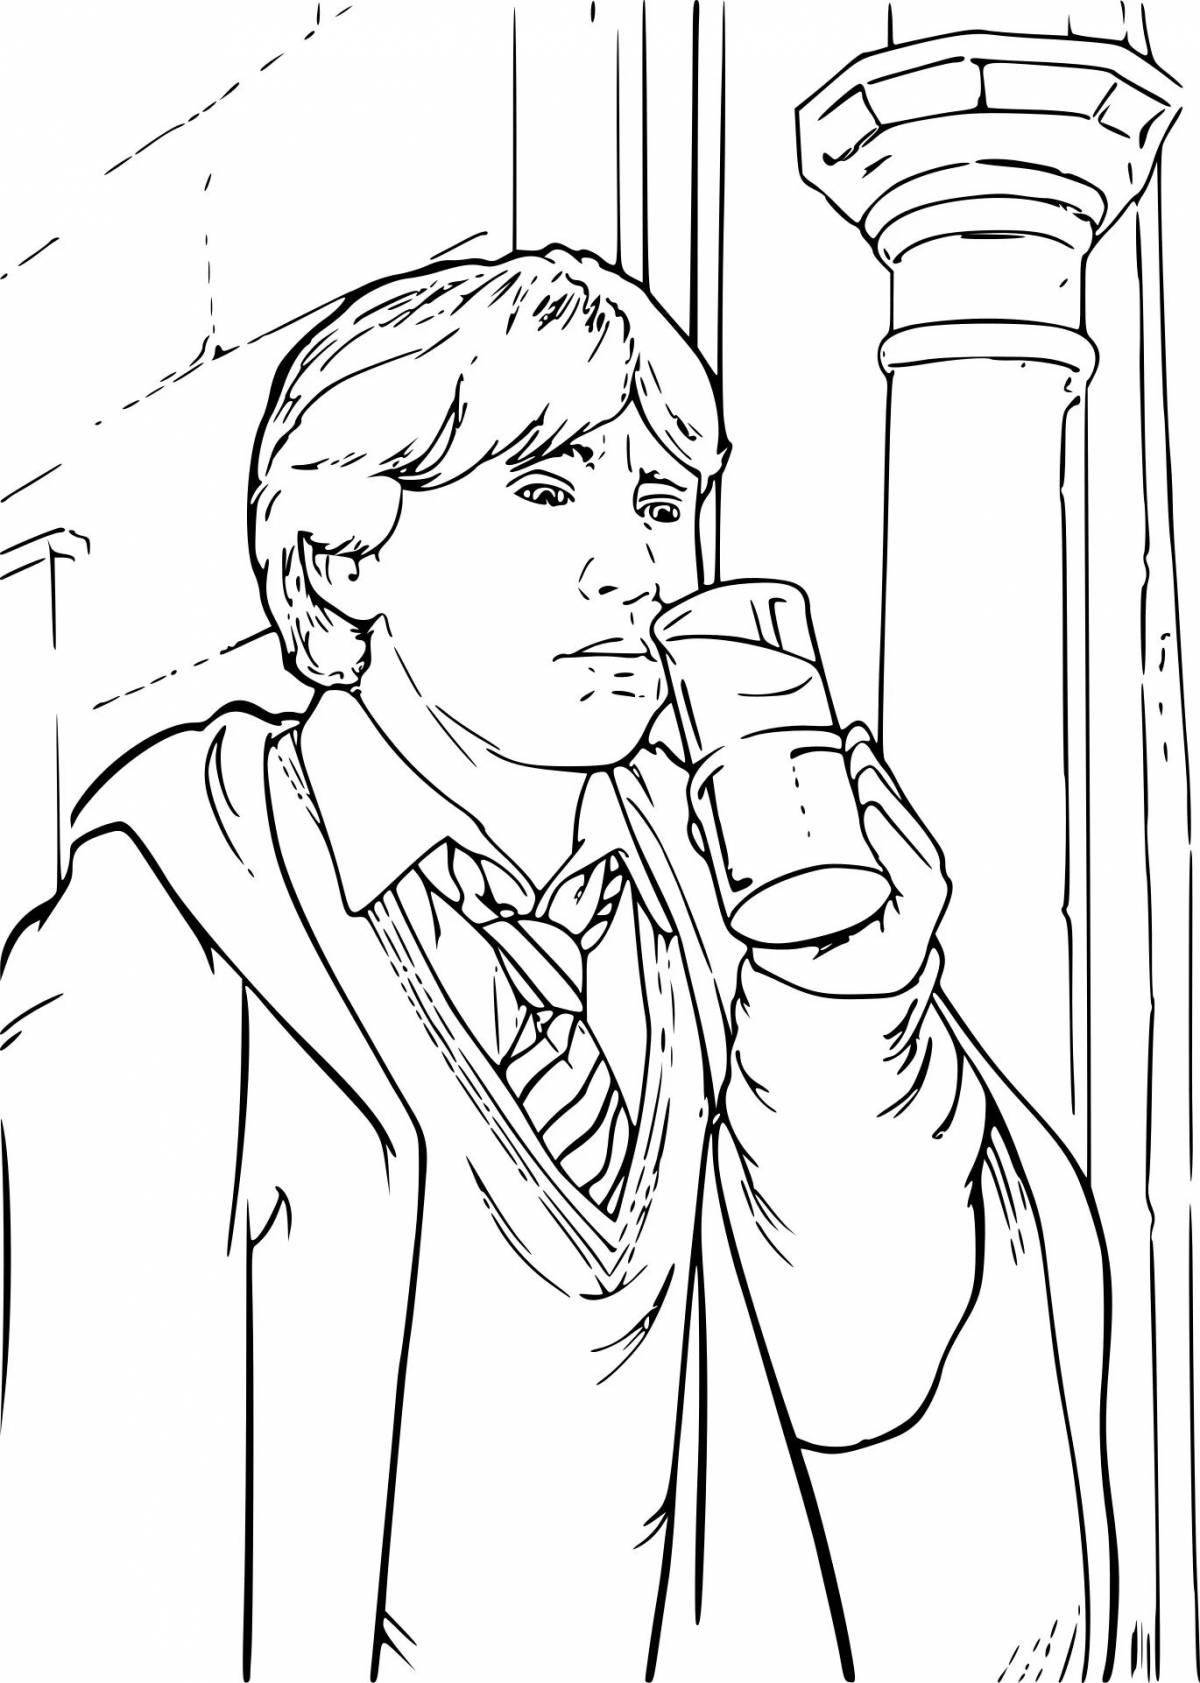 Ron's colorful coloring page